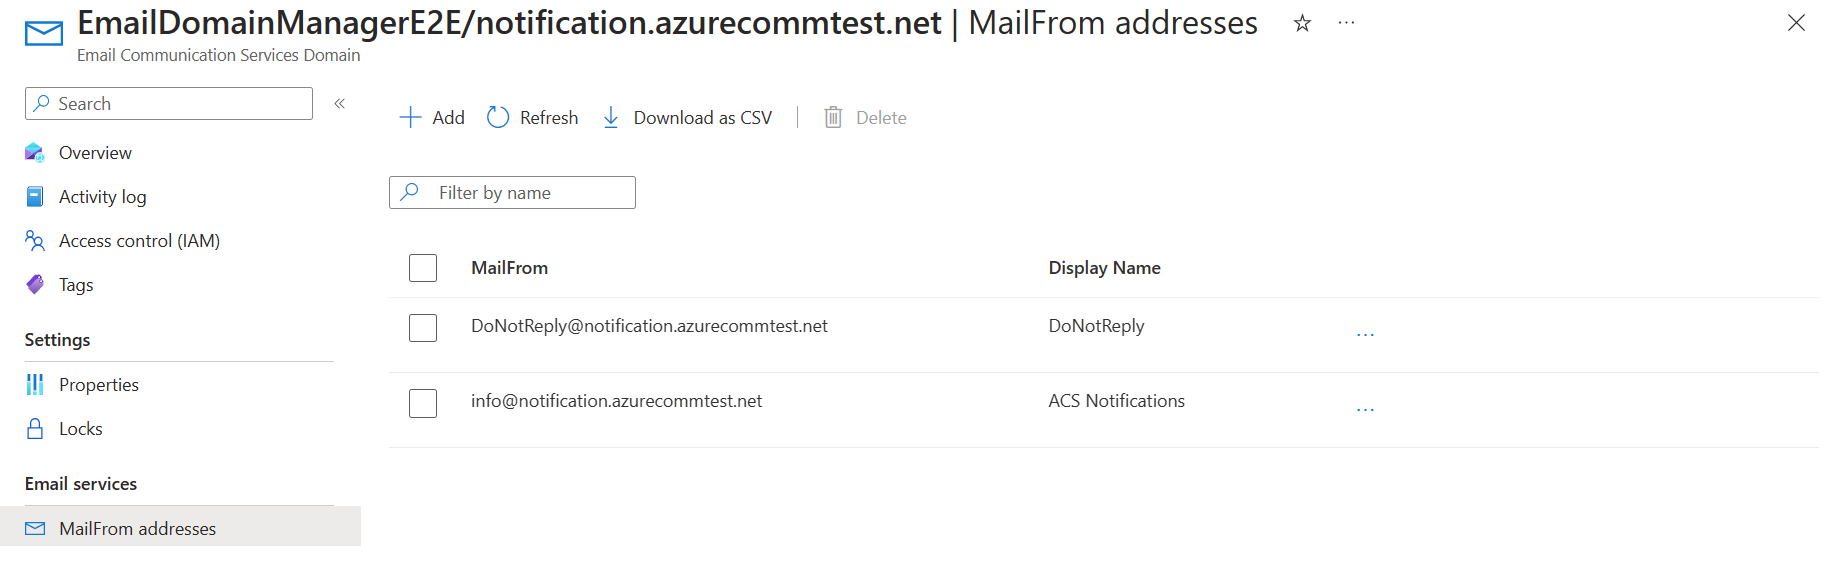 Screenshot that shows MailFrom addresses.